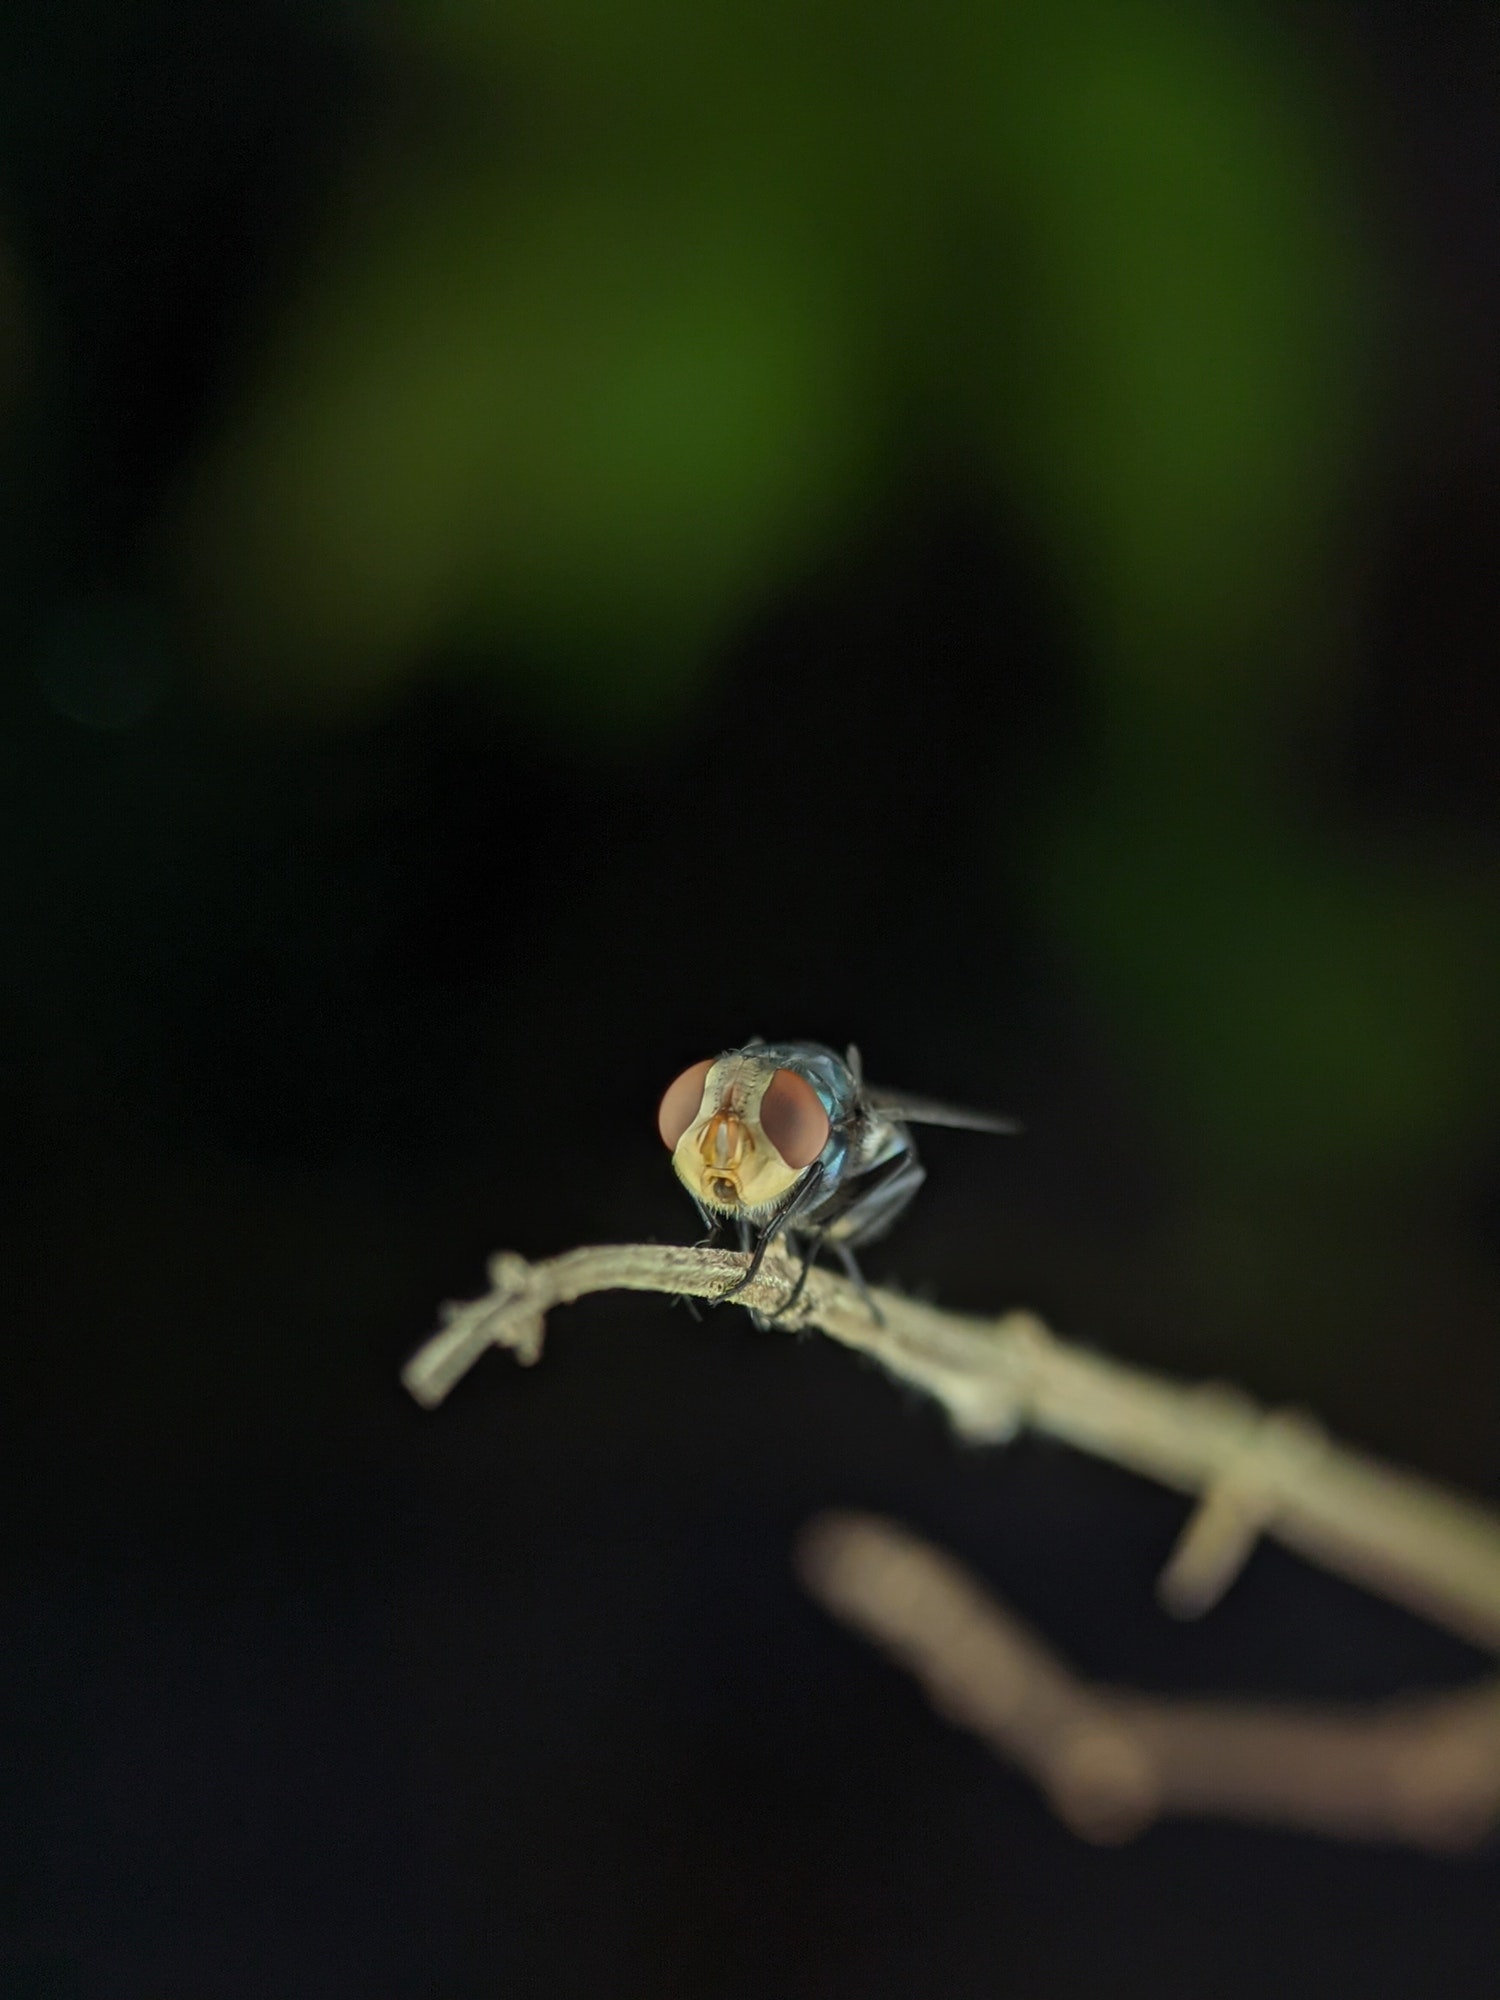 A fly is resting on a tree branch with blur background.